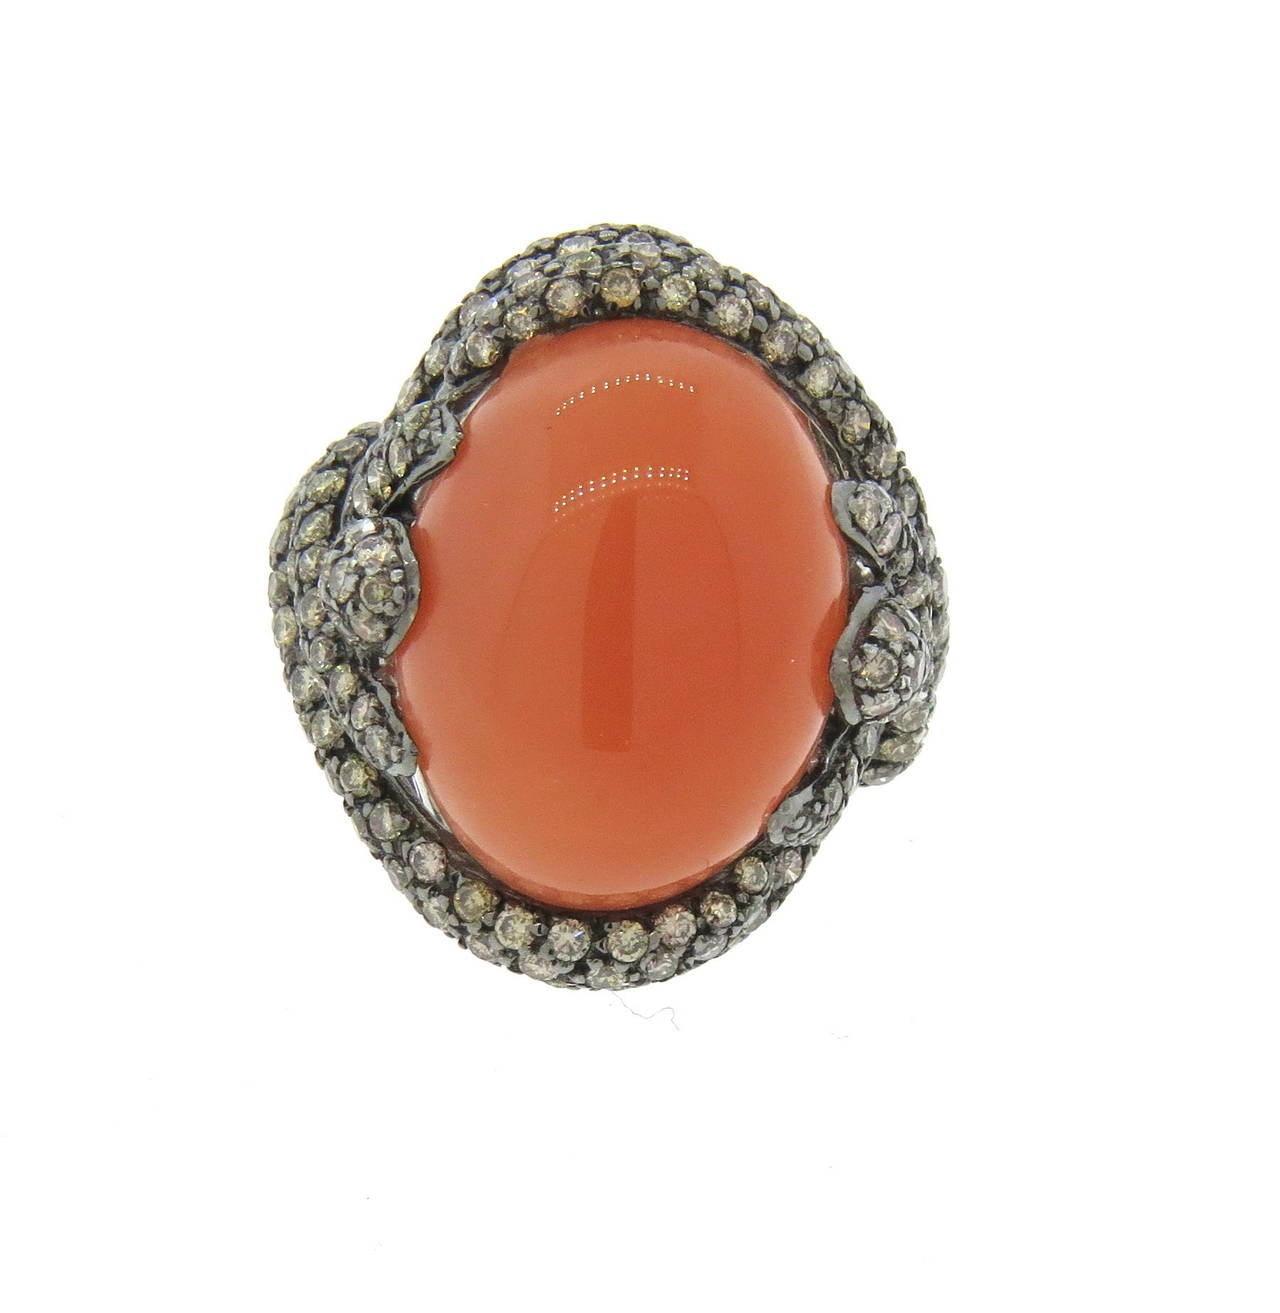 Beautiful 18k gold ring, set with oval peach moonstone cabochon, surrounded with approximately 3.80ctw in fancy diamonds. Ring is a size 7, top of the ring is 26mm x 23mm. Weight of the ring - 14.5 grams